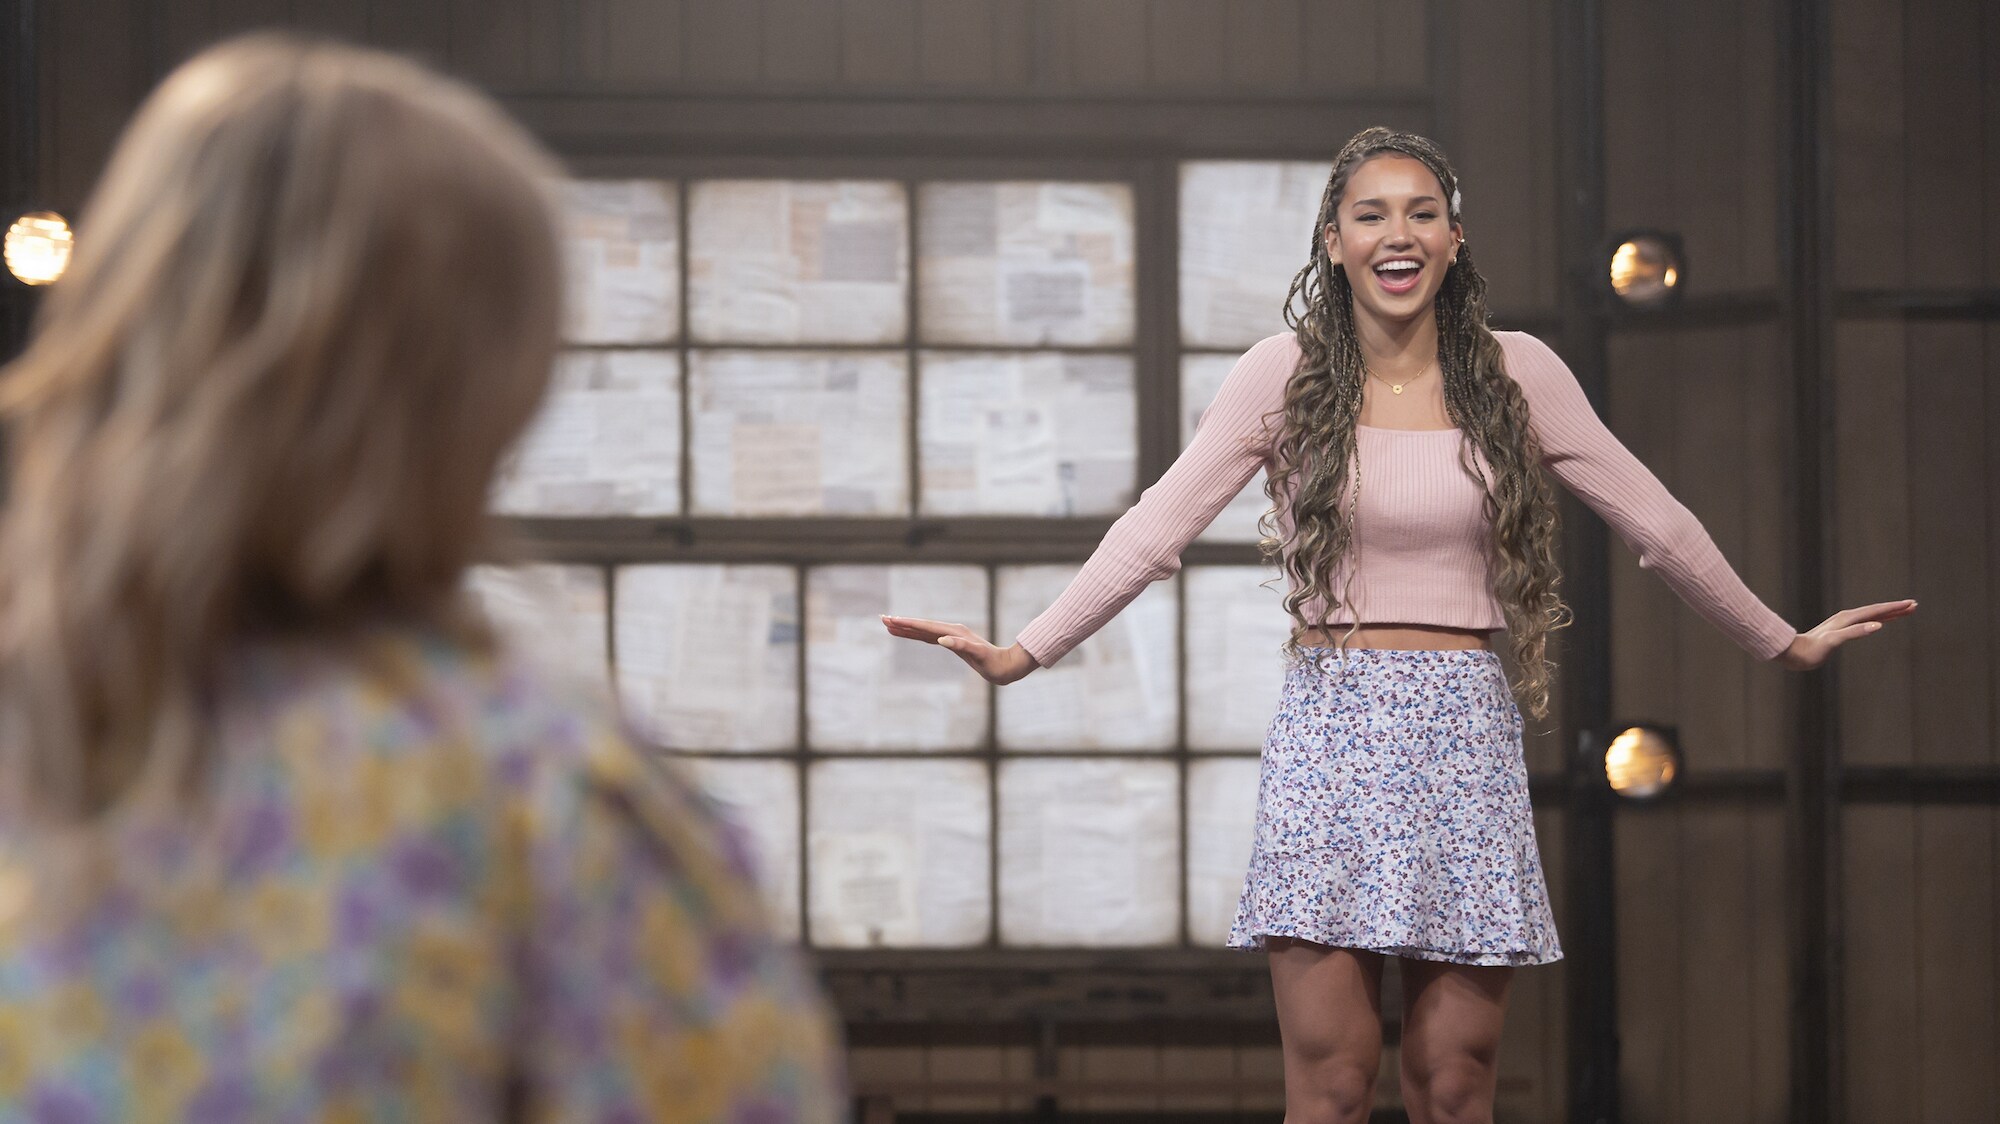 HIGH SCHOOL MUSICAL: THE MUSICAL: THE SERIES - “Into the Unknown“ (Disney/Anne Marie Fox) SOFIA WYLIE